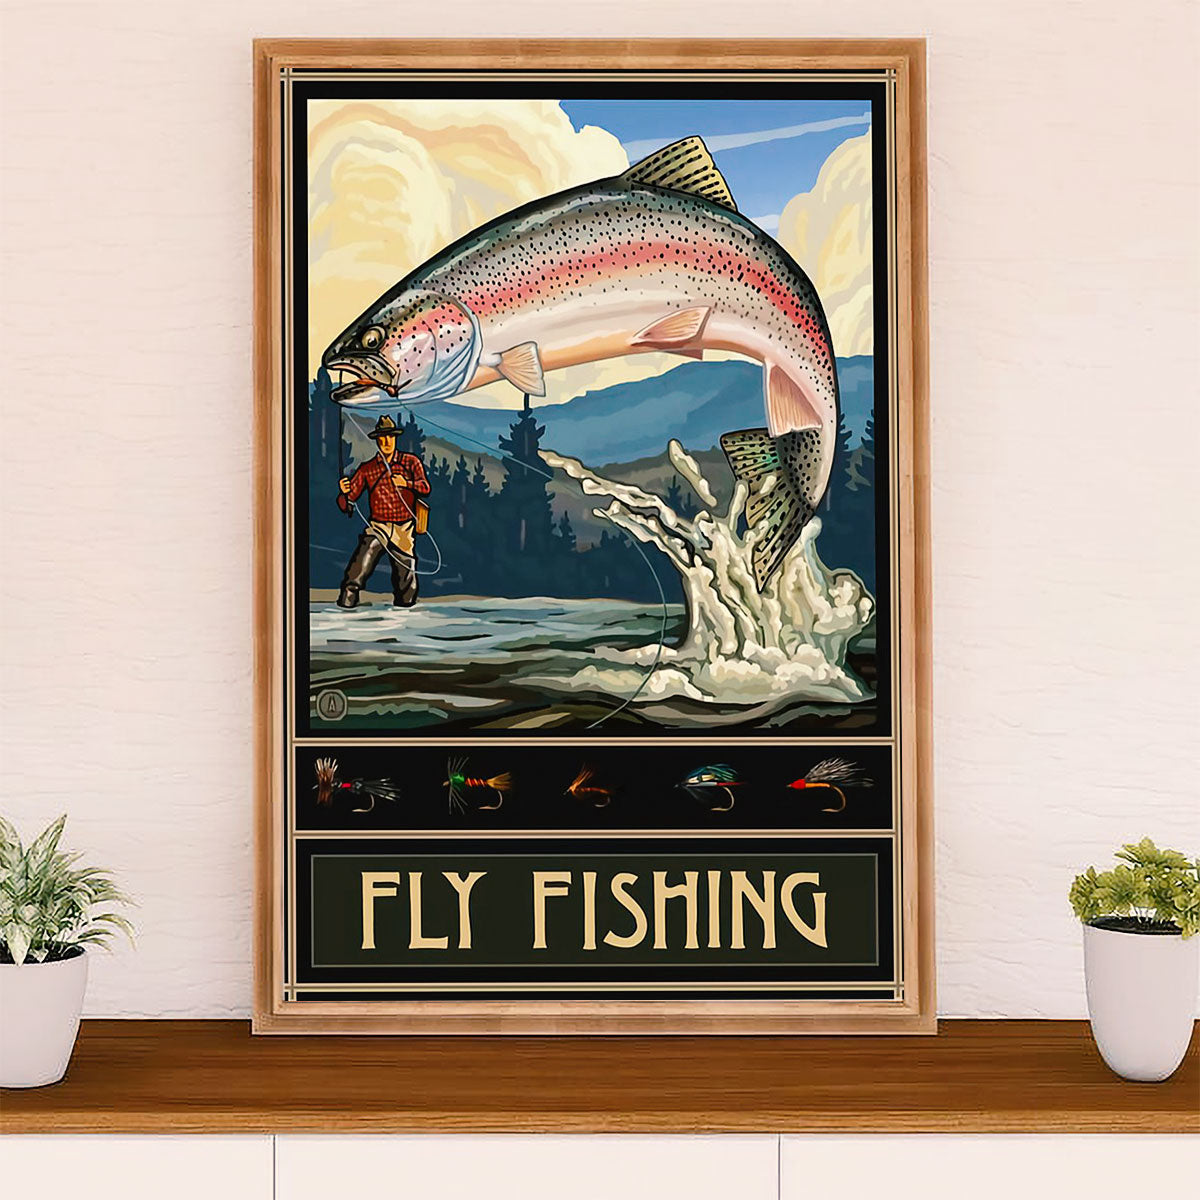 Fly Fishing Poster Personalized Name Stores About The Colorful